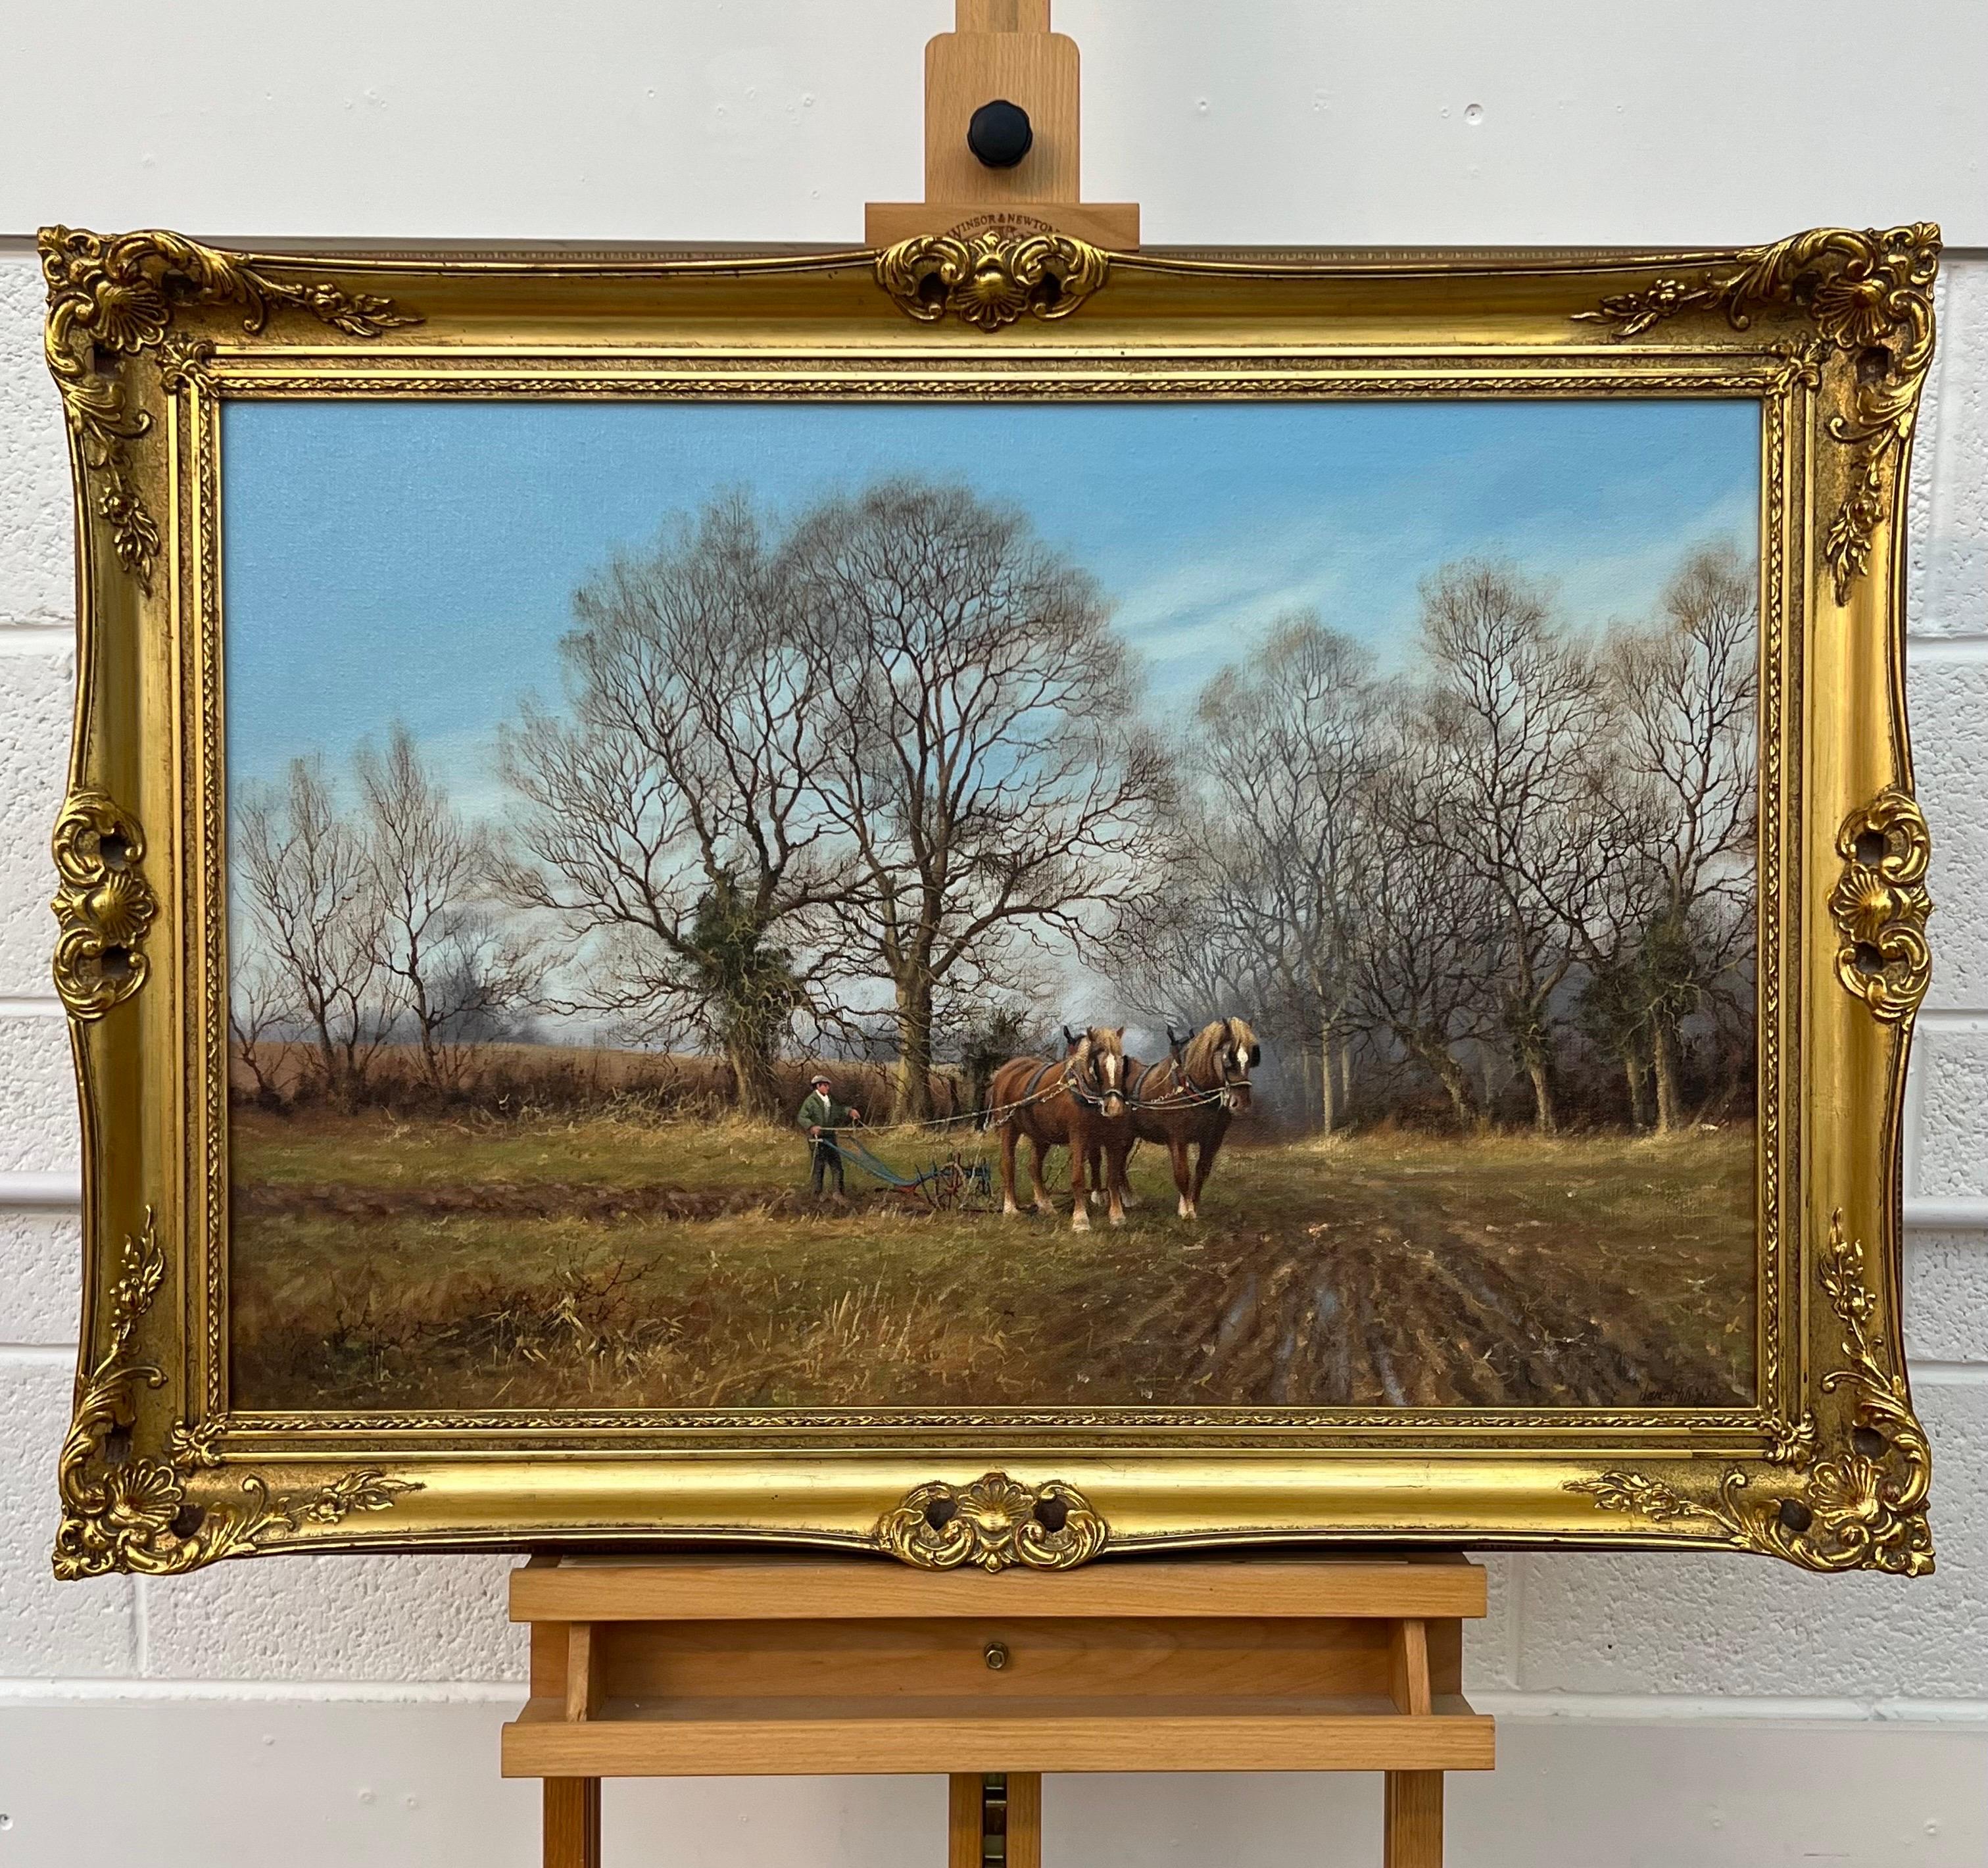 English Countryside & Trees with Horses Pulling Plough by Vintage British Artist - Realist Painting by James Wright